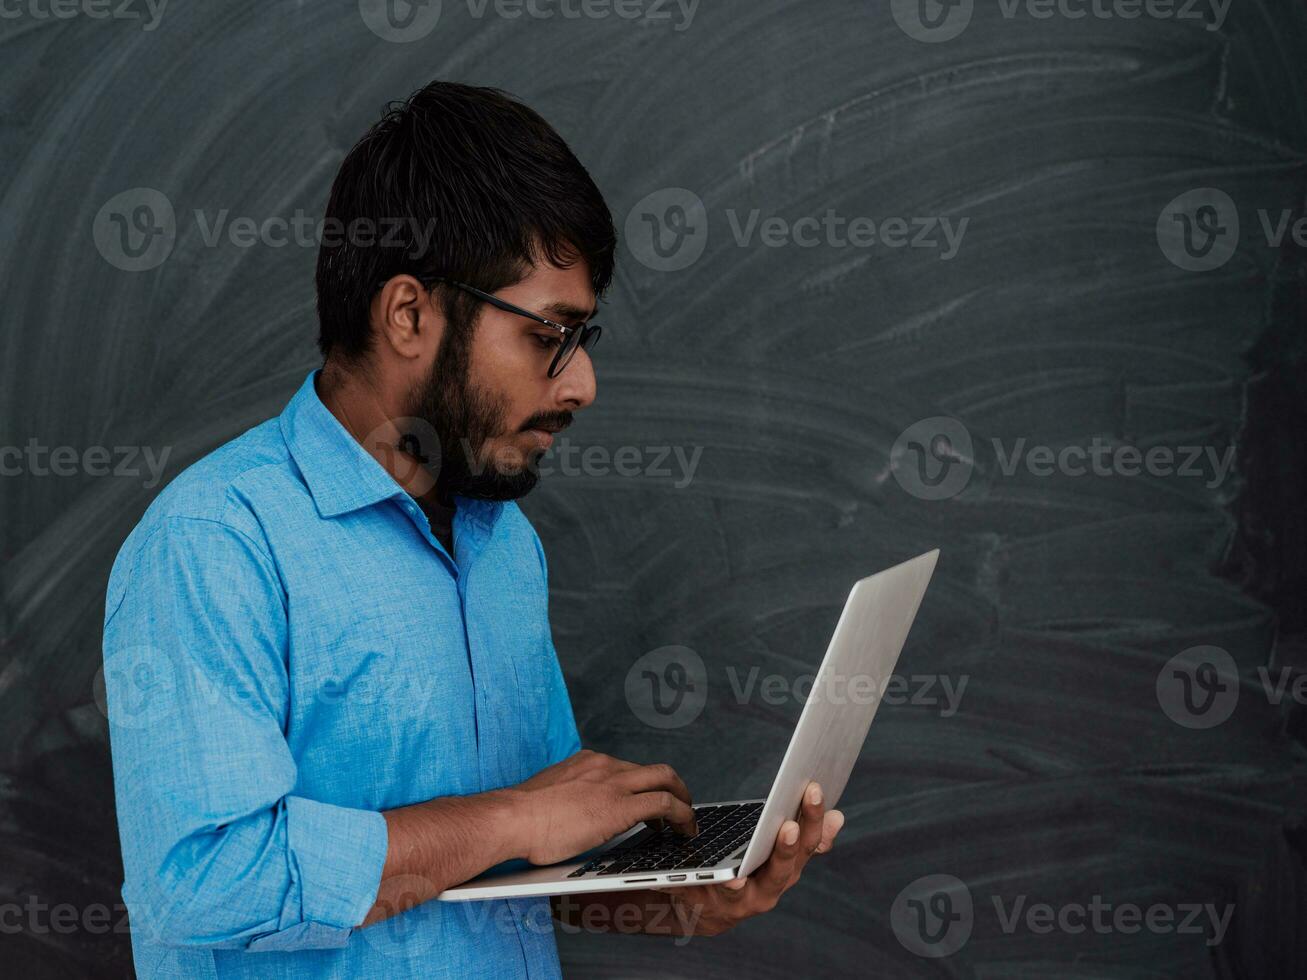 Indian smiling young student in blue shirt and glasses using laptop and posing on school blackboard background photo